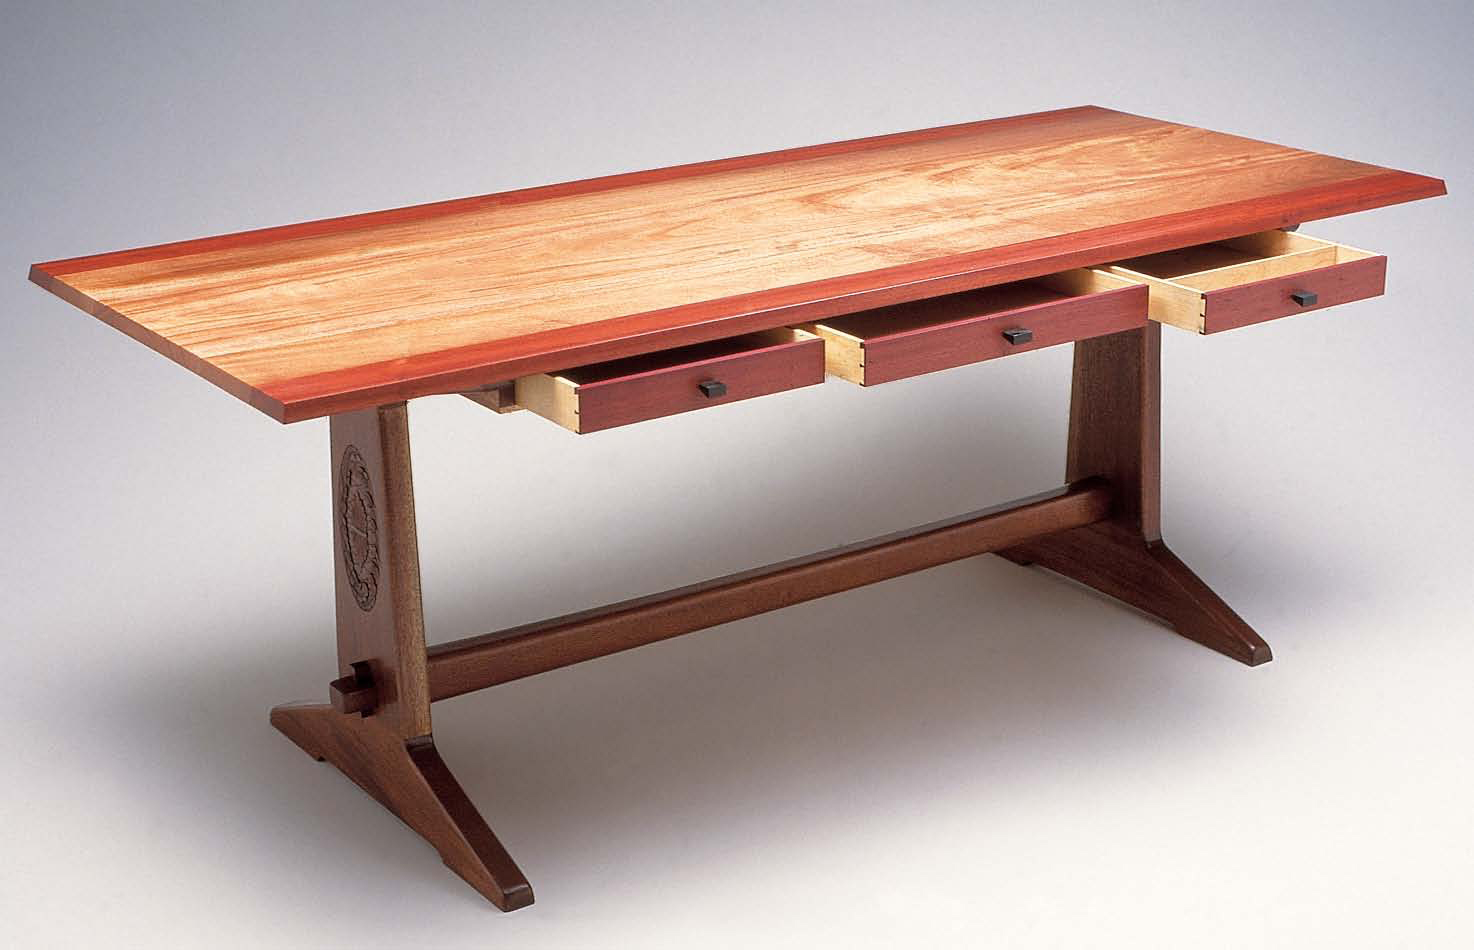 wood table design pictures photo - 9